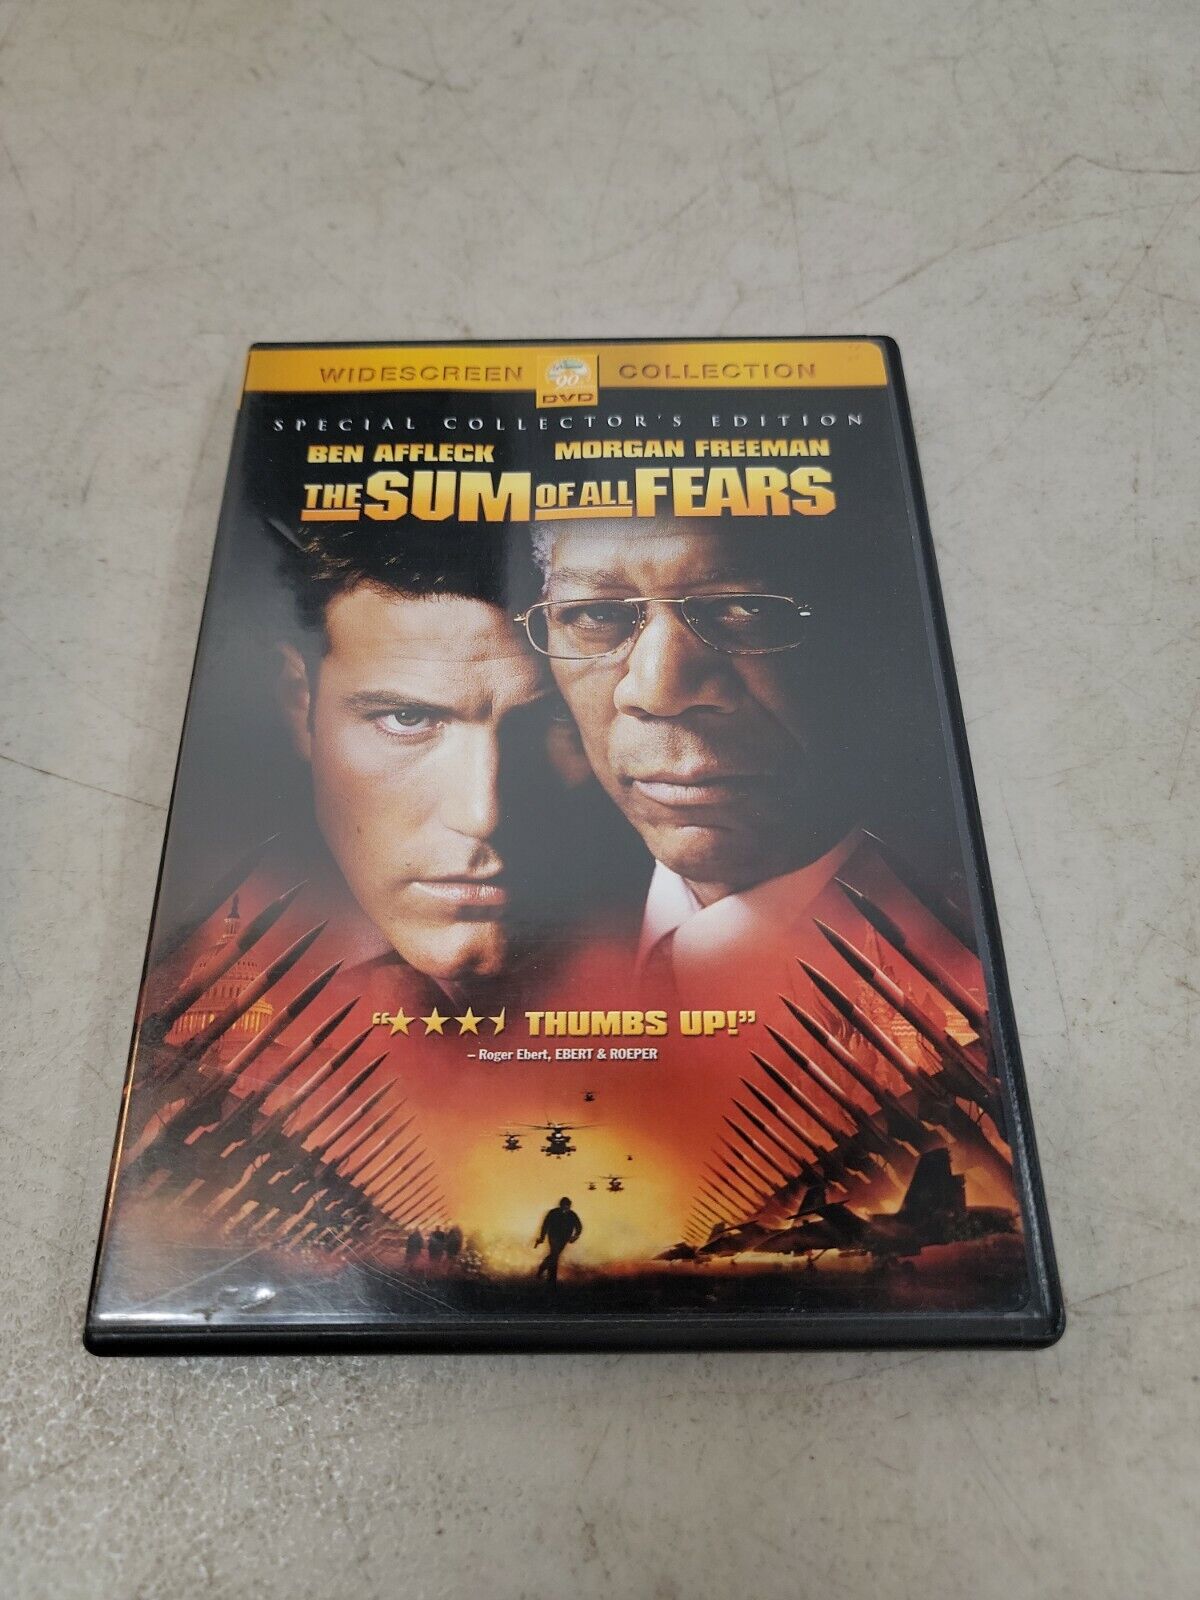 The Sum of All Fears (Special Collector's Edition) - DVD 97363372240 | eBay